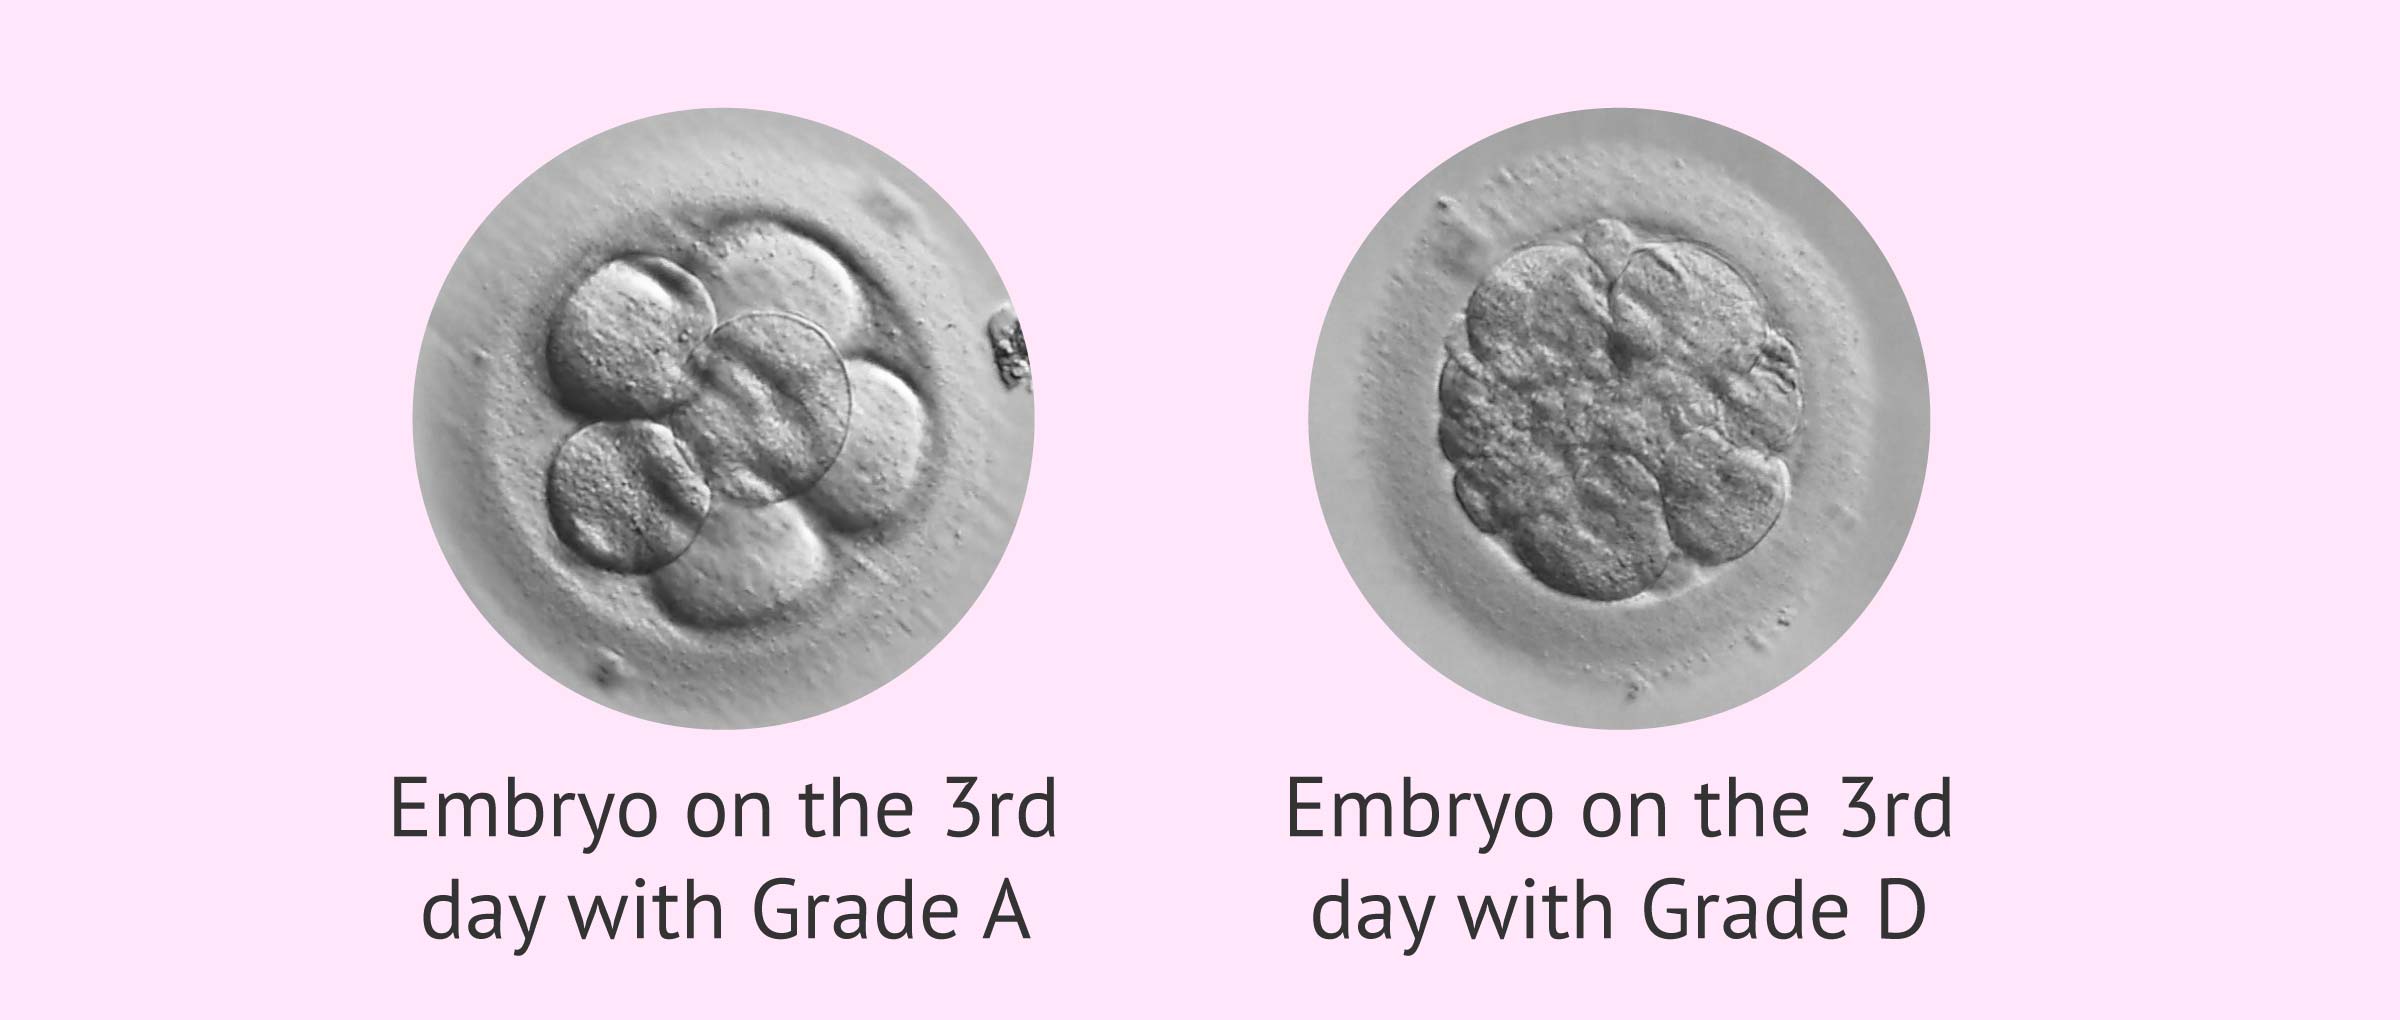 Classification of the embryos on the 3rd day of development